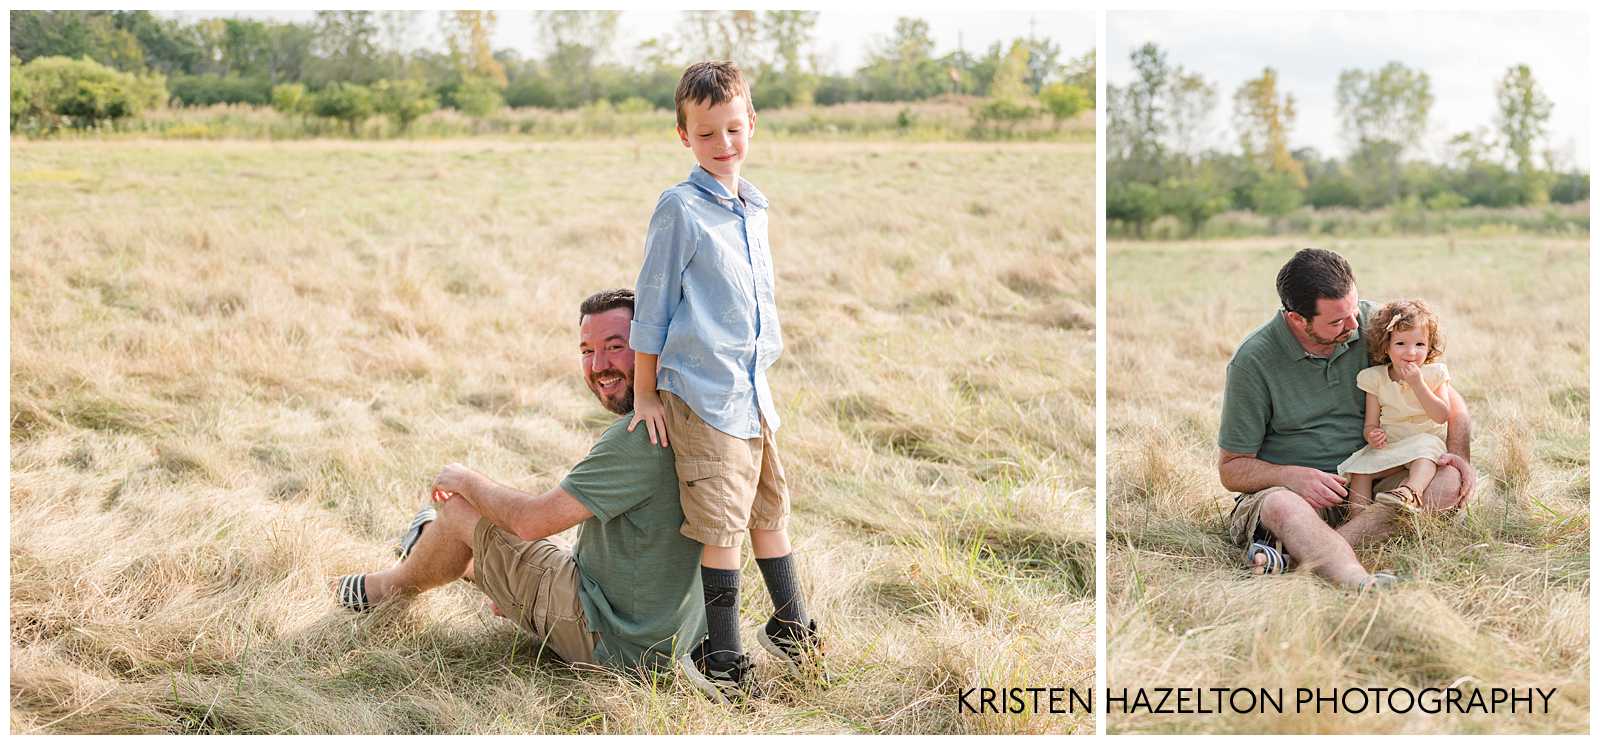 Dad and son in a field